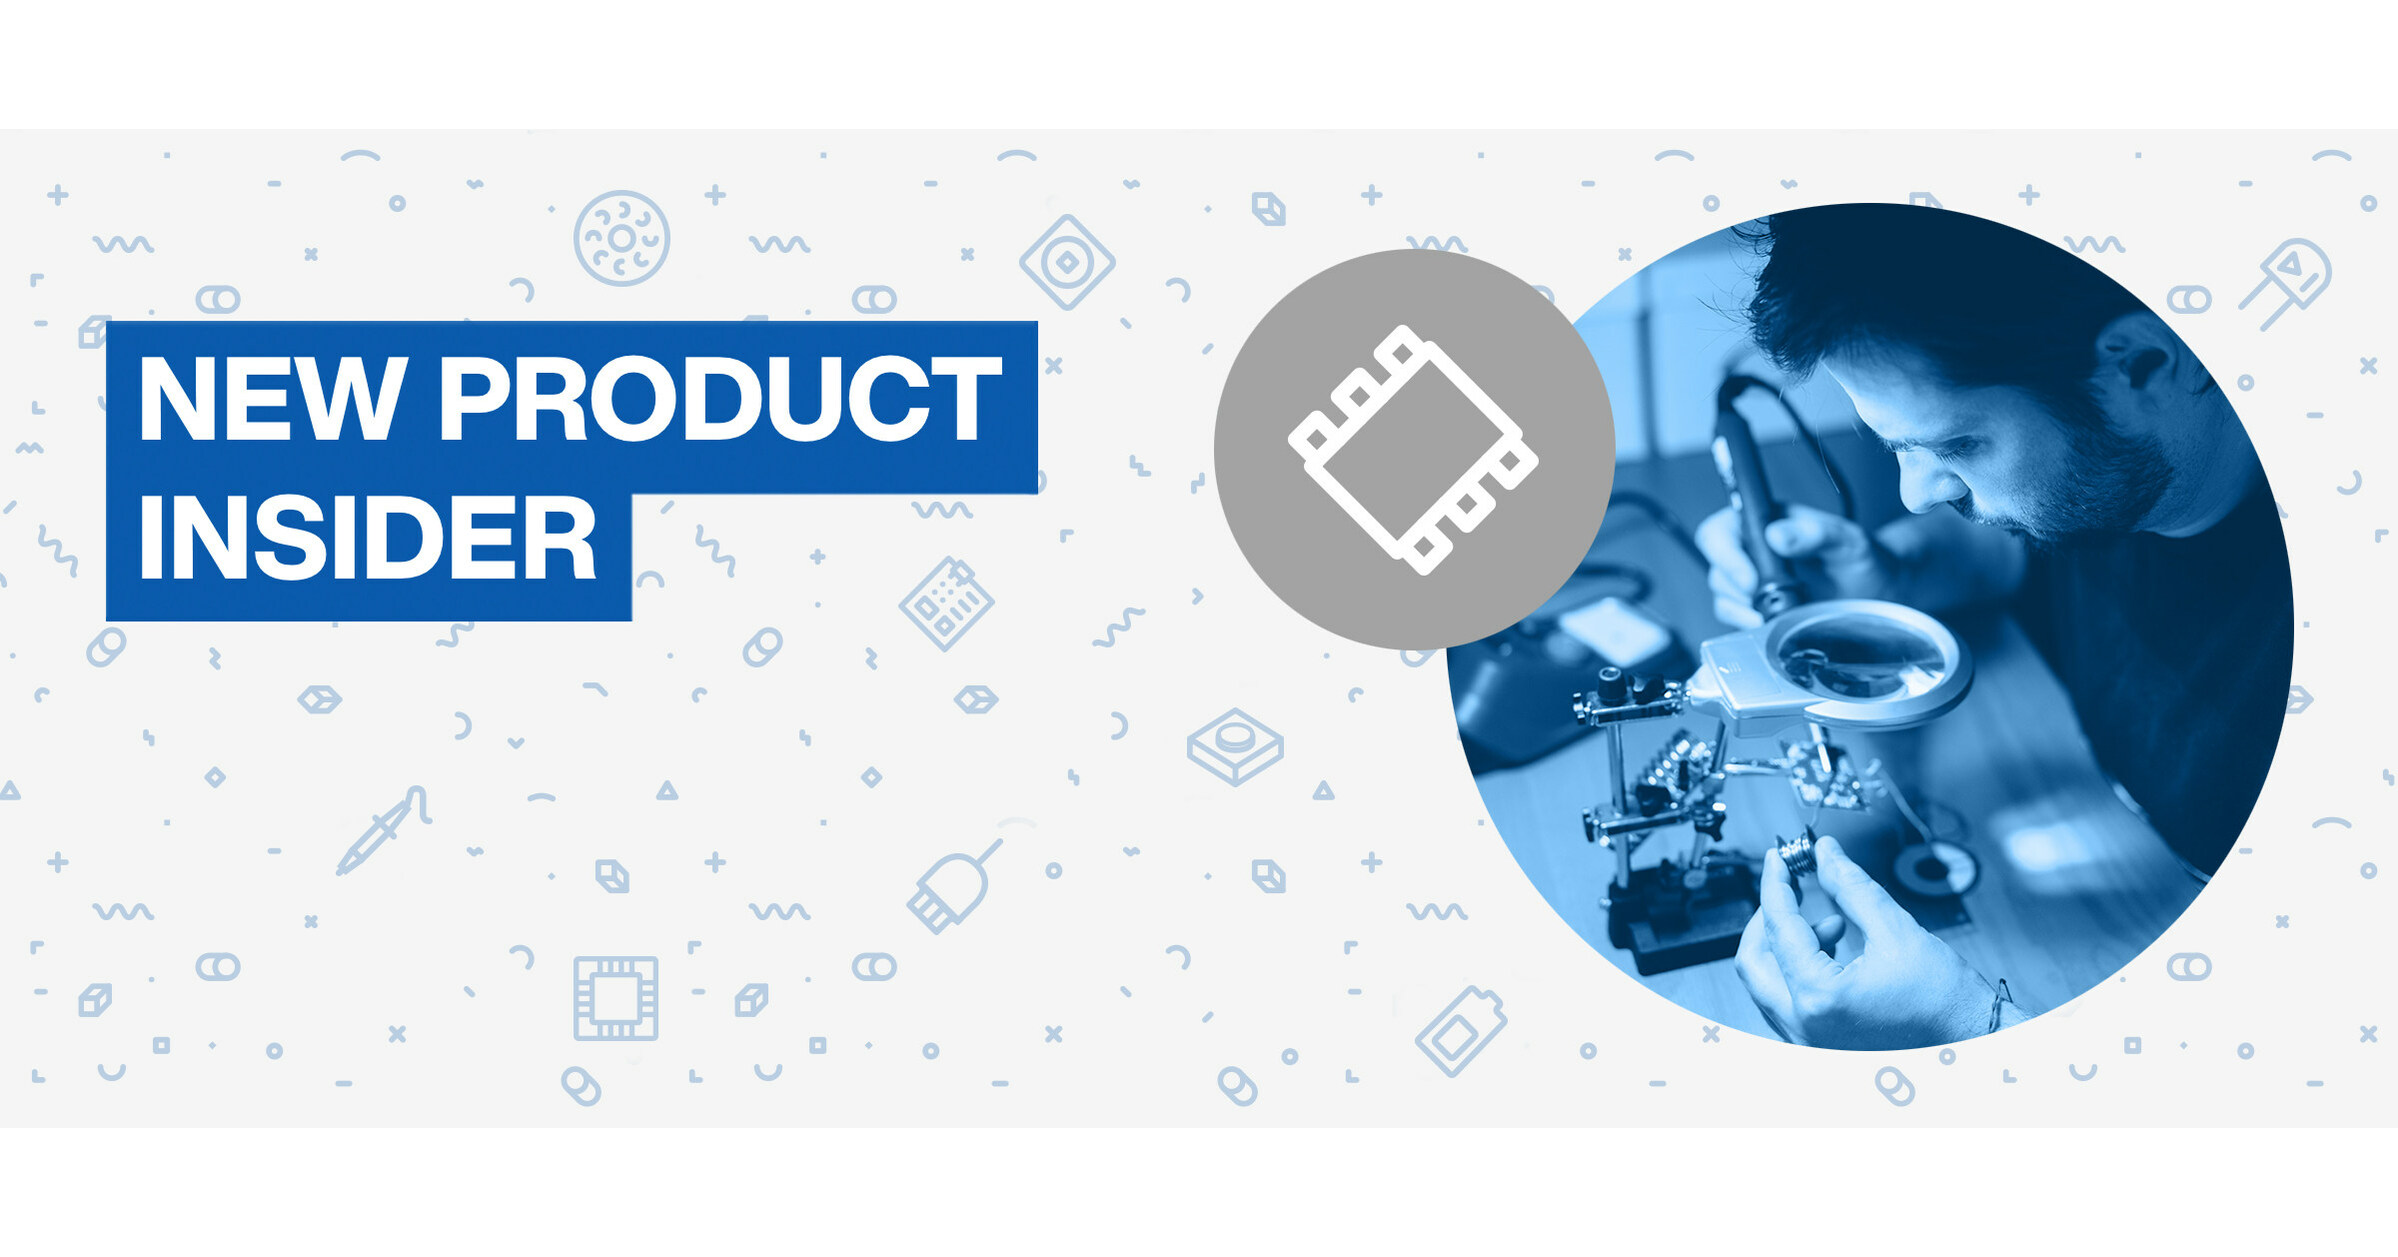 Mouser Electronics New Product Insider: Over 8,000 New Parts Added